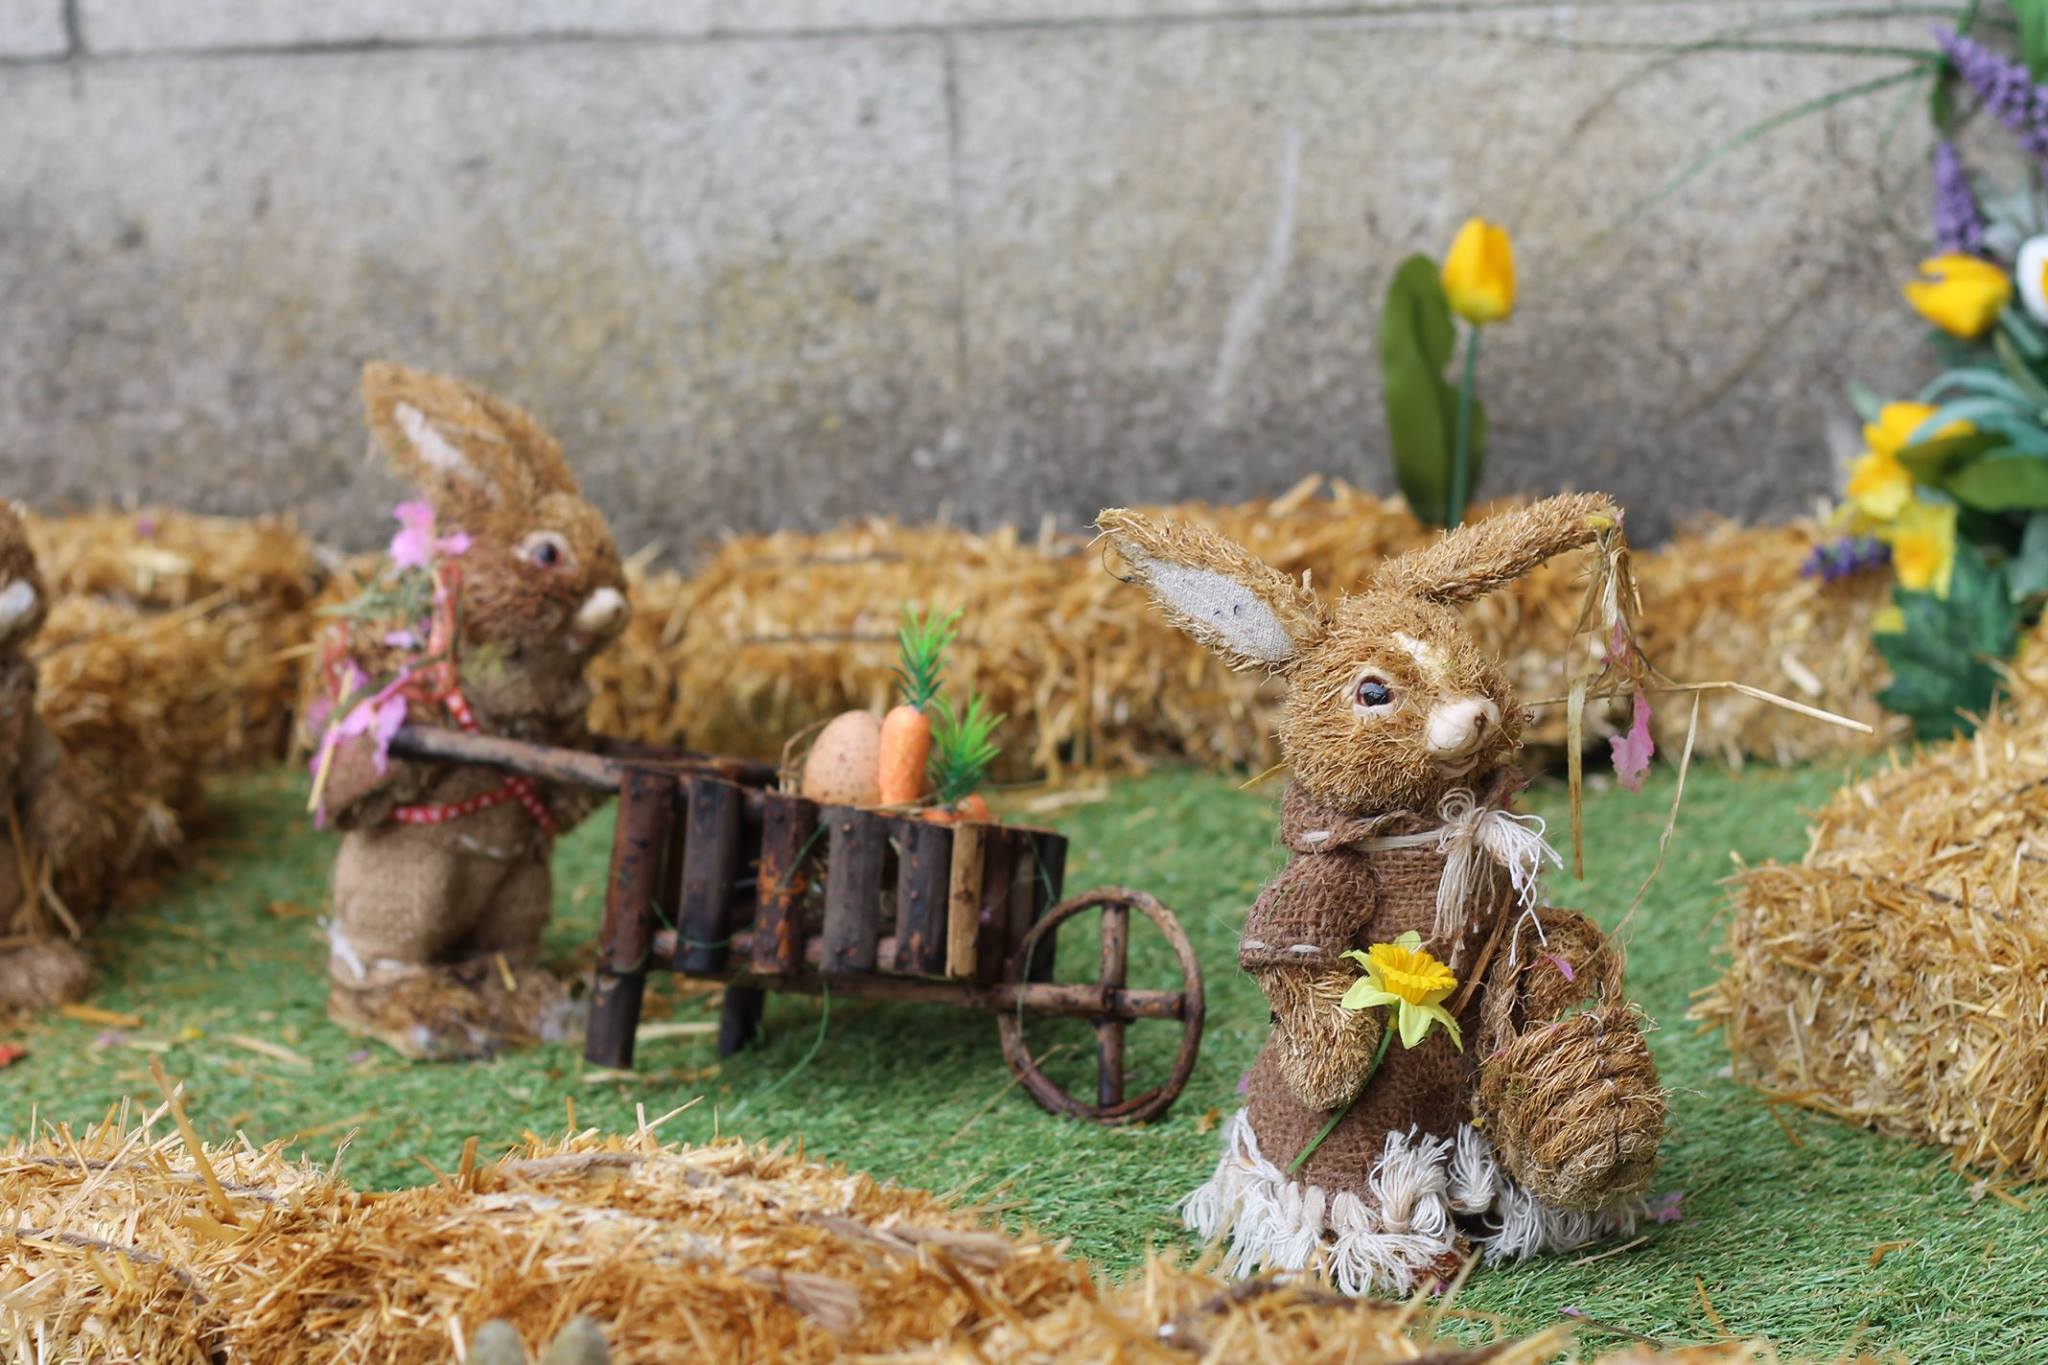 Easter bunnies made of straw